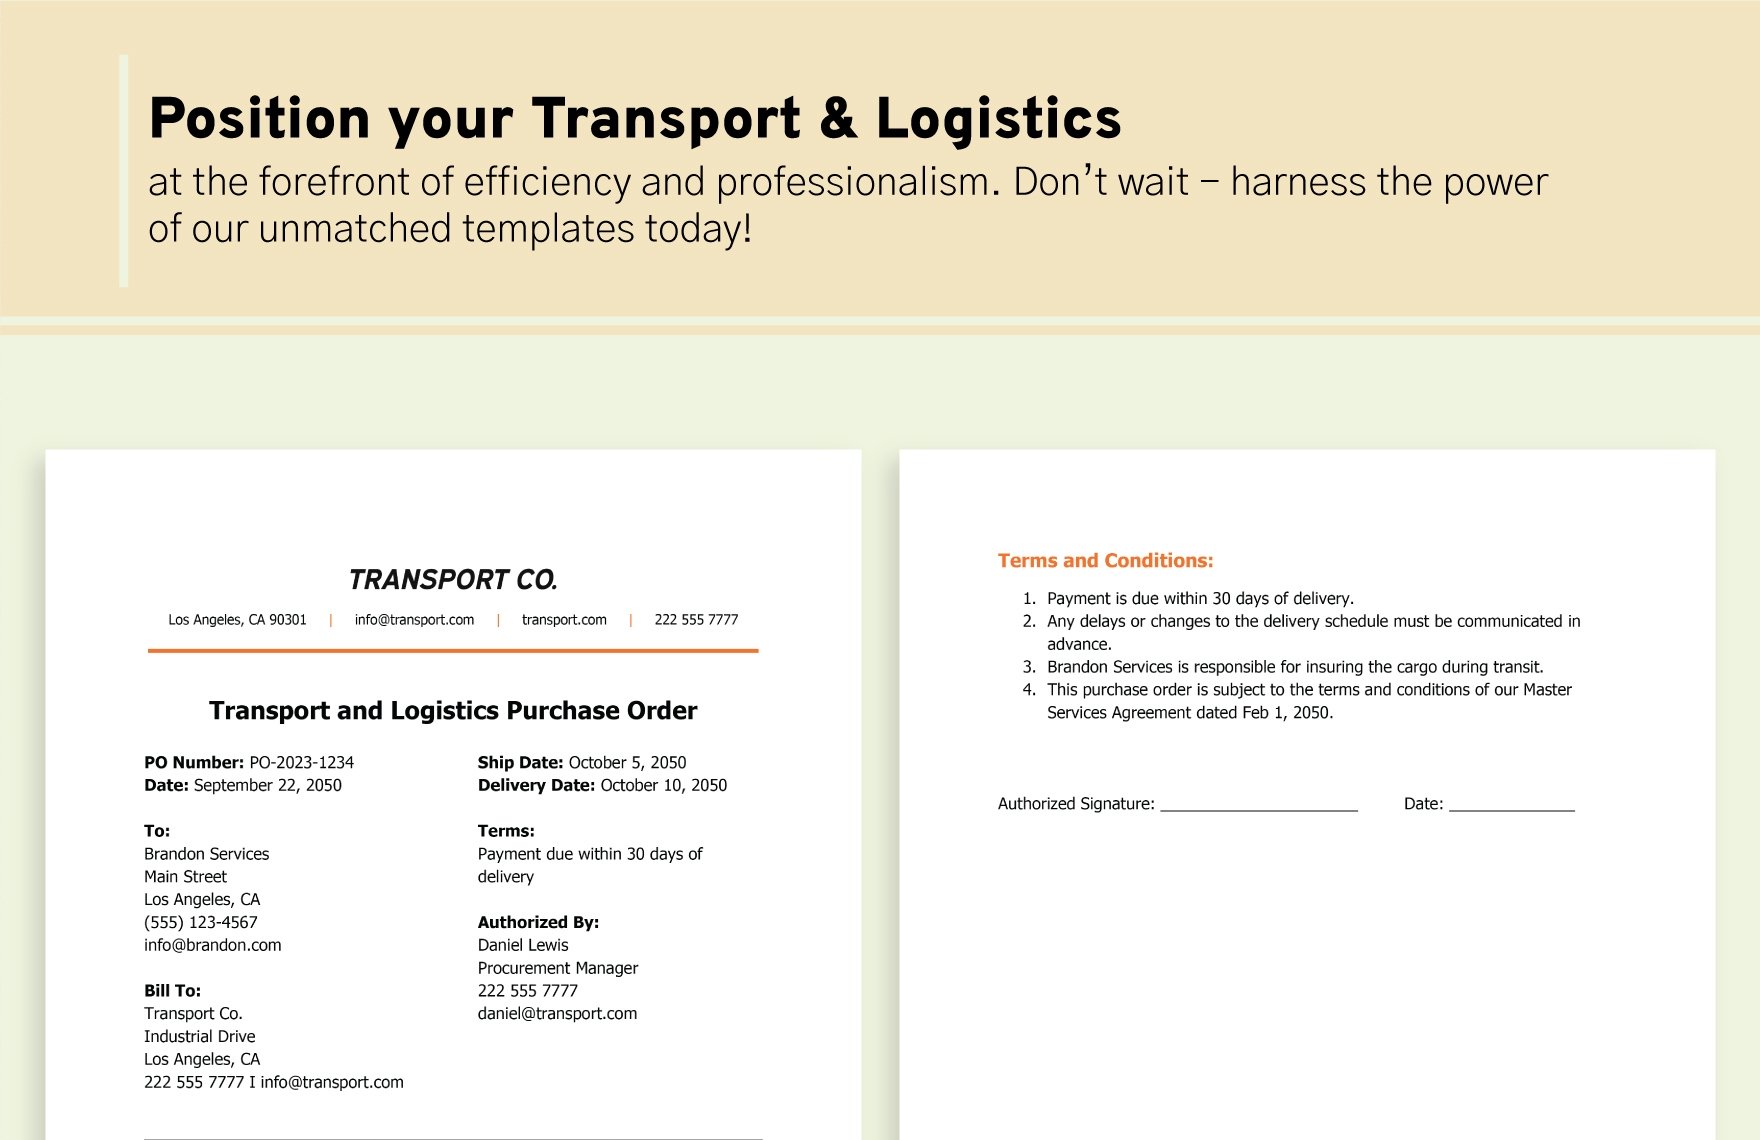 Transport and Logistics Purchase Order Template